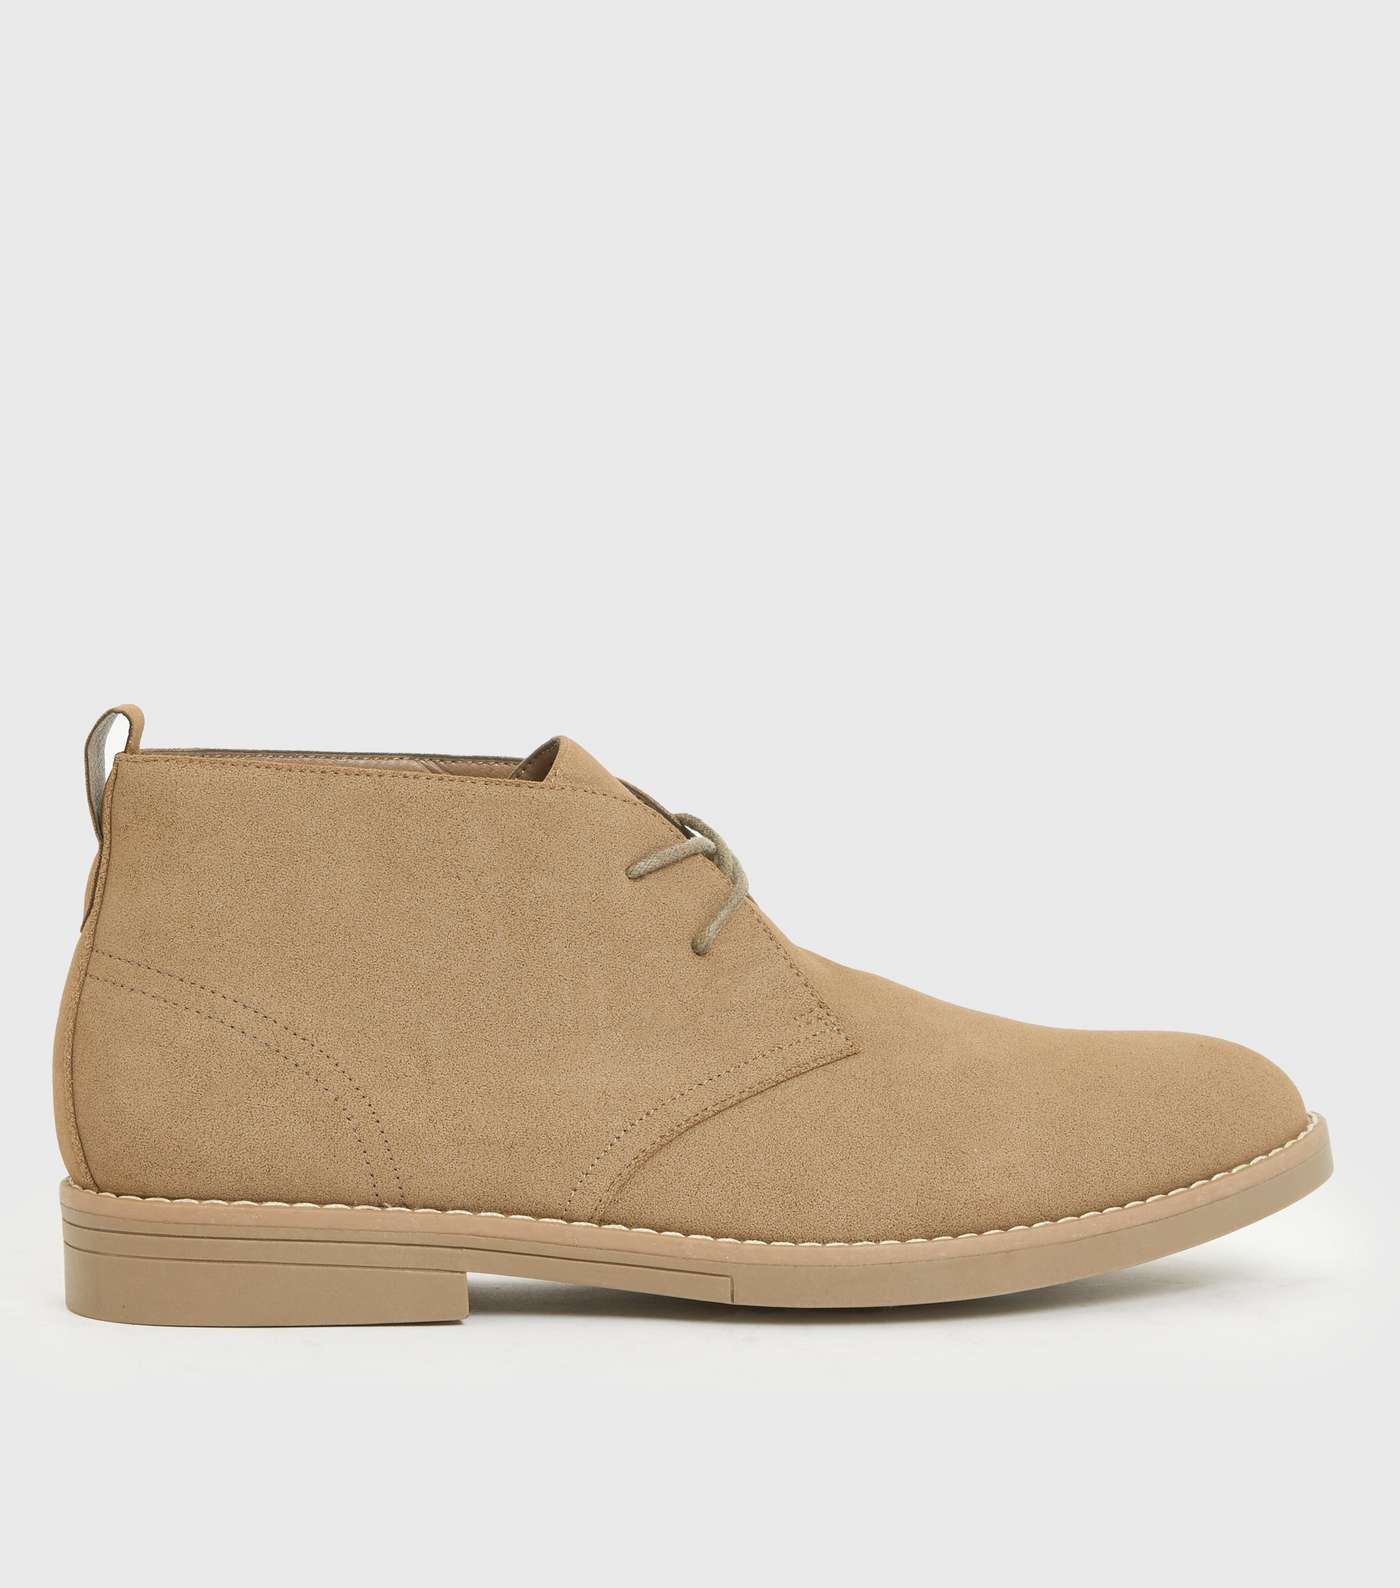 Stone Suedette Round Toe Lace Up Desert Boots